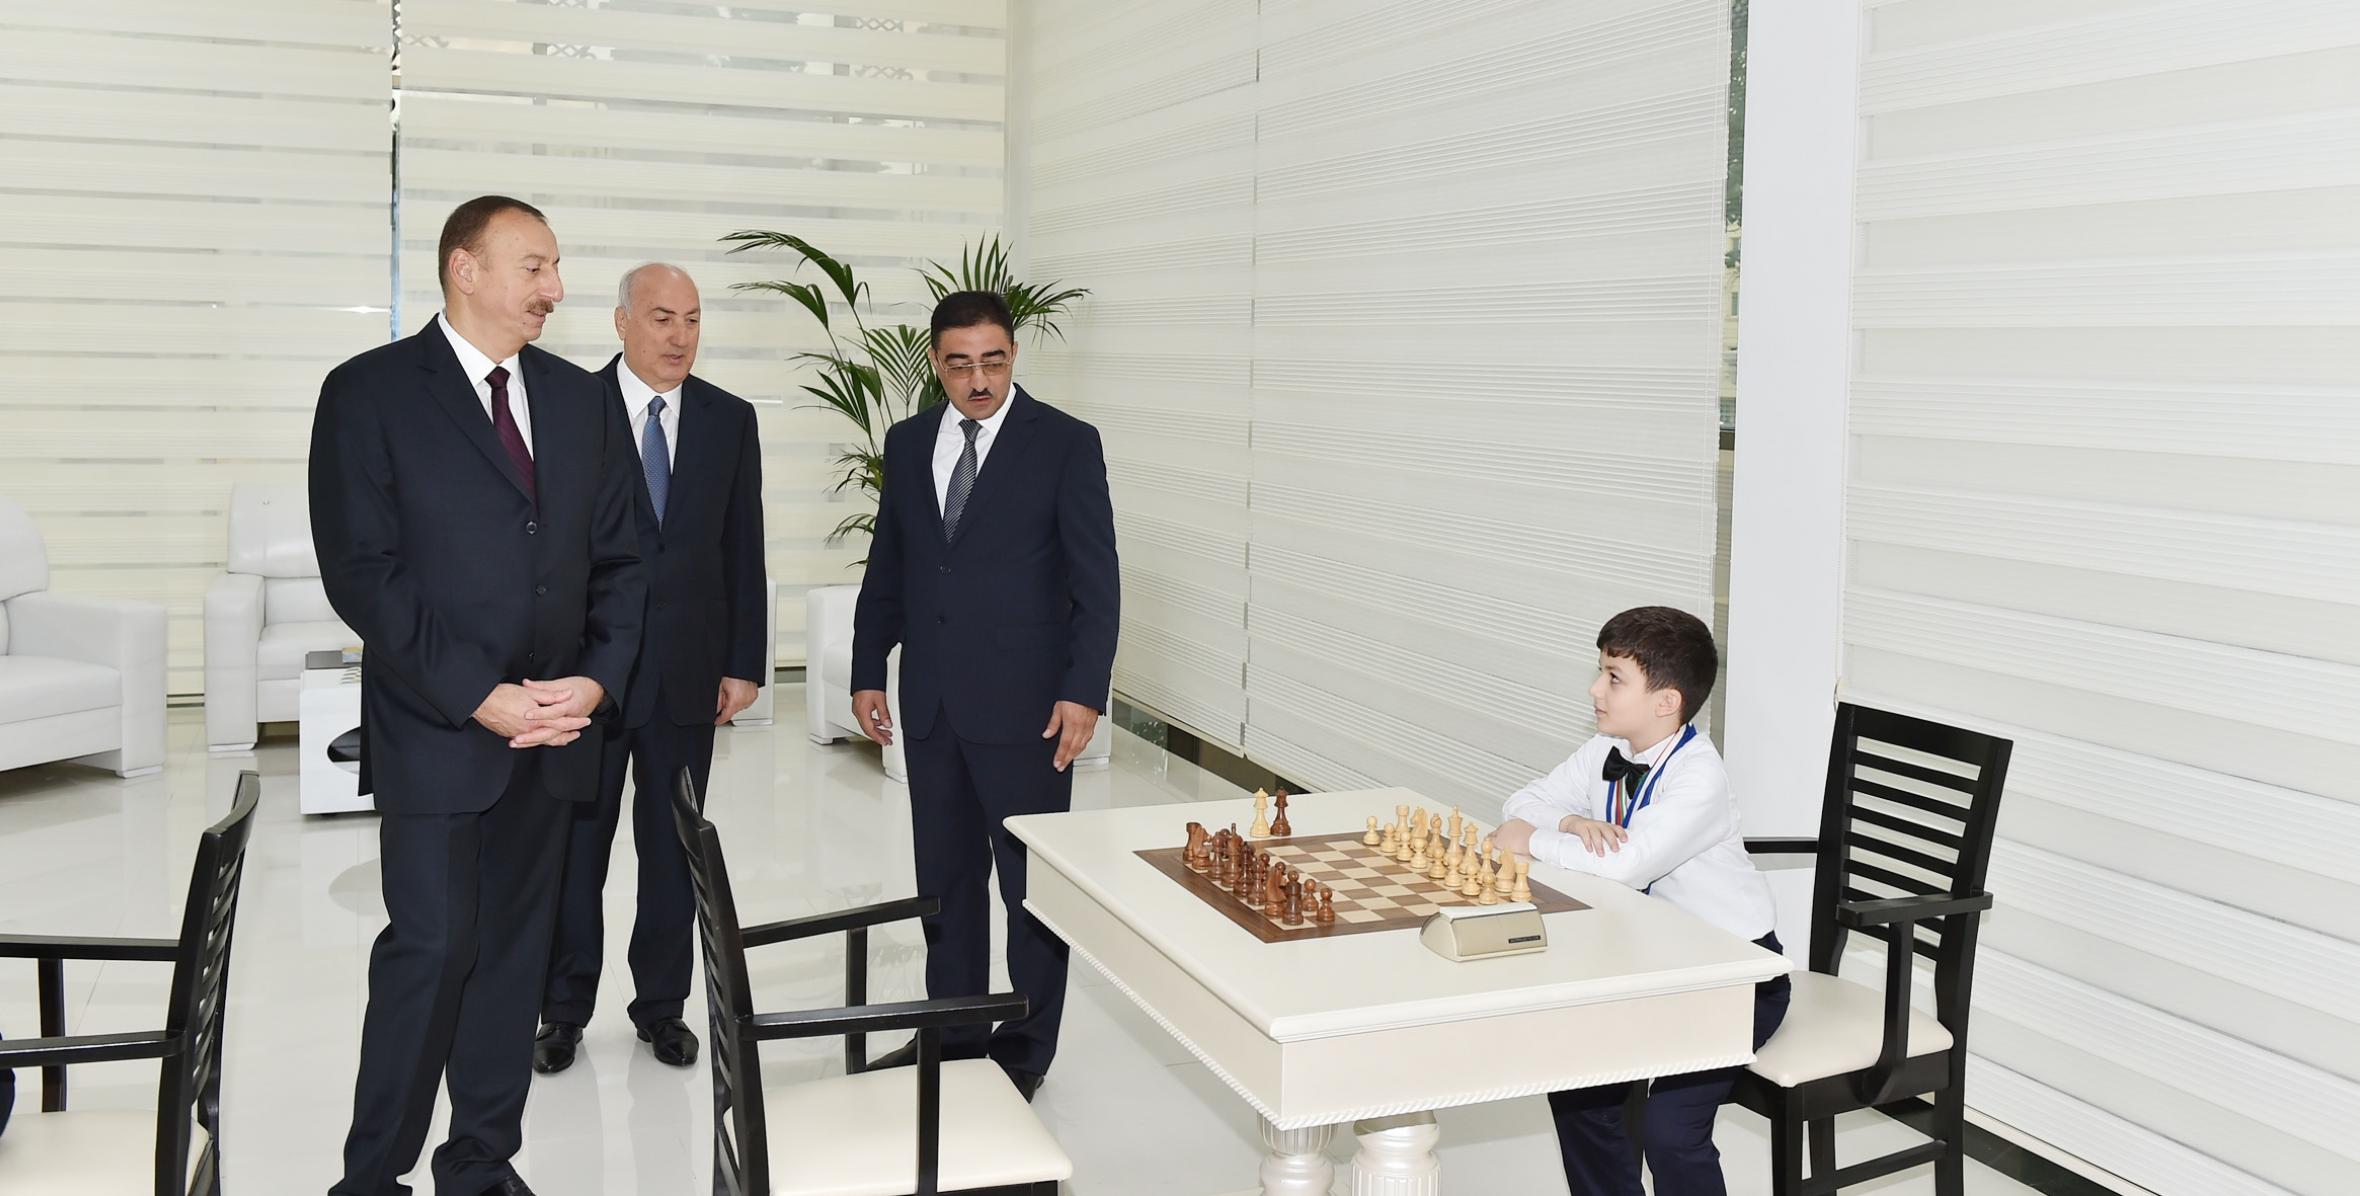 Ilham Aliyev attended the opening of a chess school in the city of Khirdalan